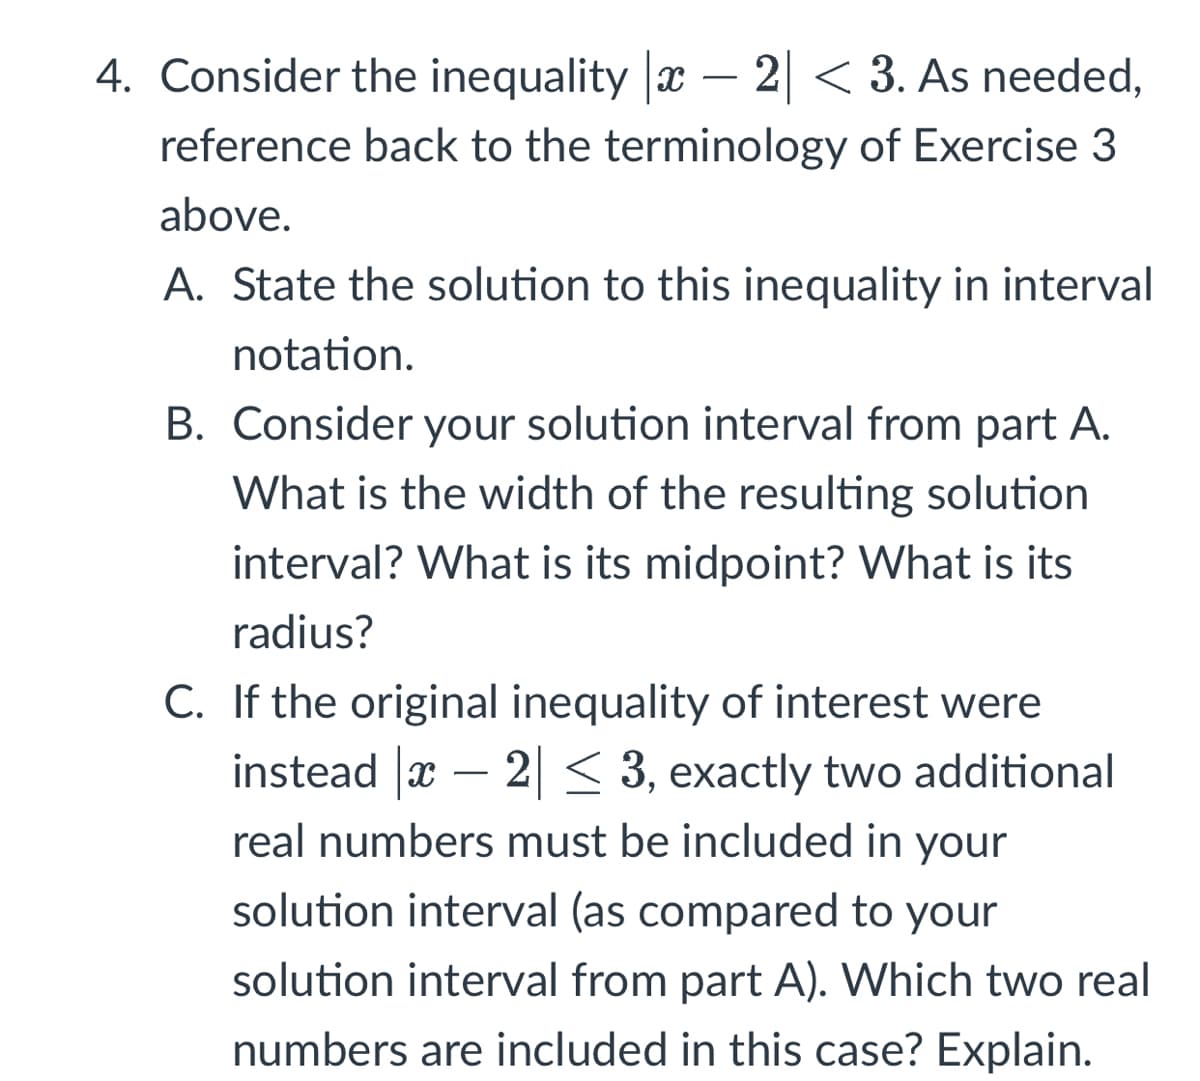 4. Consider the inequality |x − 2| < 3. As needed,
reference back to the terminology of Exercise 3
above.
A. State the solution to this inequality in interval
notation.
B. Consider your solution interval from part A.
What is the width of the resulting solution
interval? What is its midpoint? What is its
radius?
C. If the original inequality of interest were
instead |ï − 2| ≤ 3, exactly two additional
real numbers must be included in your
solution interval (as compared to your
solution interval from part A). Which two real
numbers are included in this case? Explain.